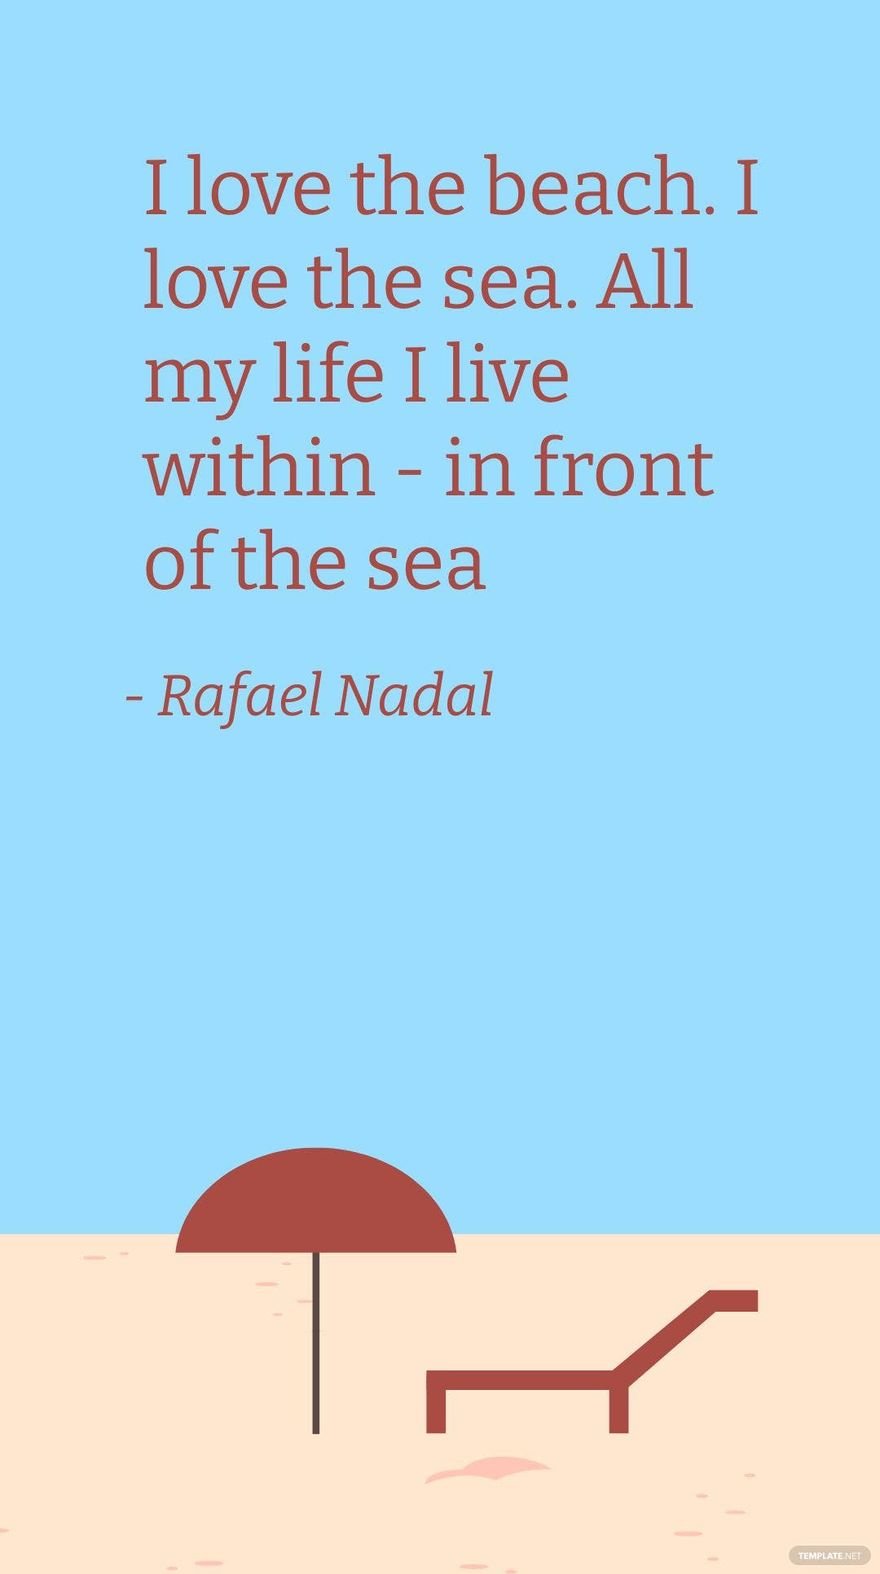 Rafael Nadal - I love the beach. I love the sea. All my life I live within - in front of the sea